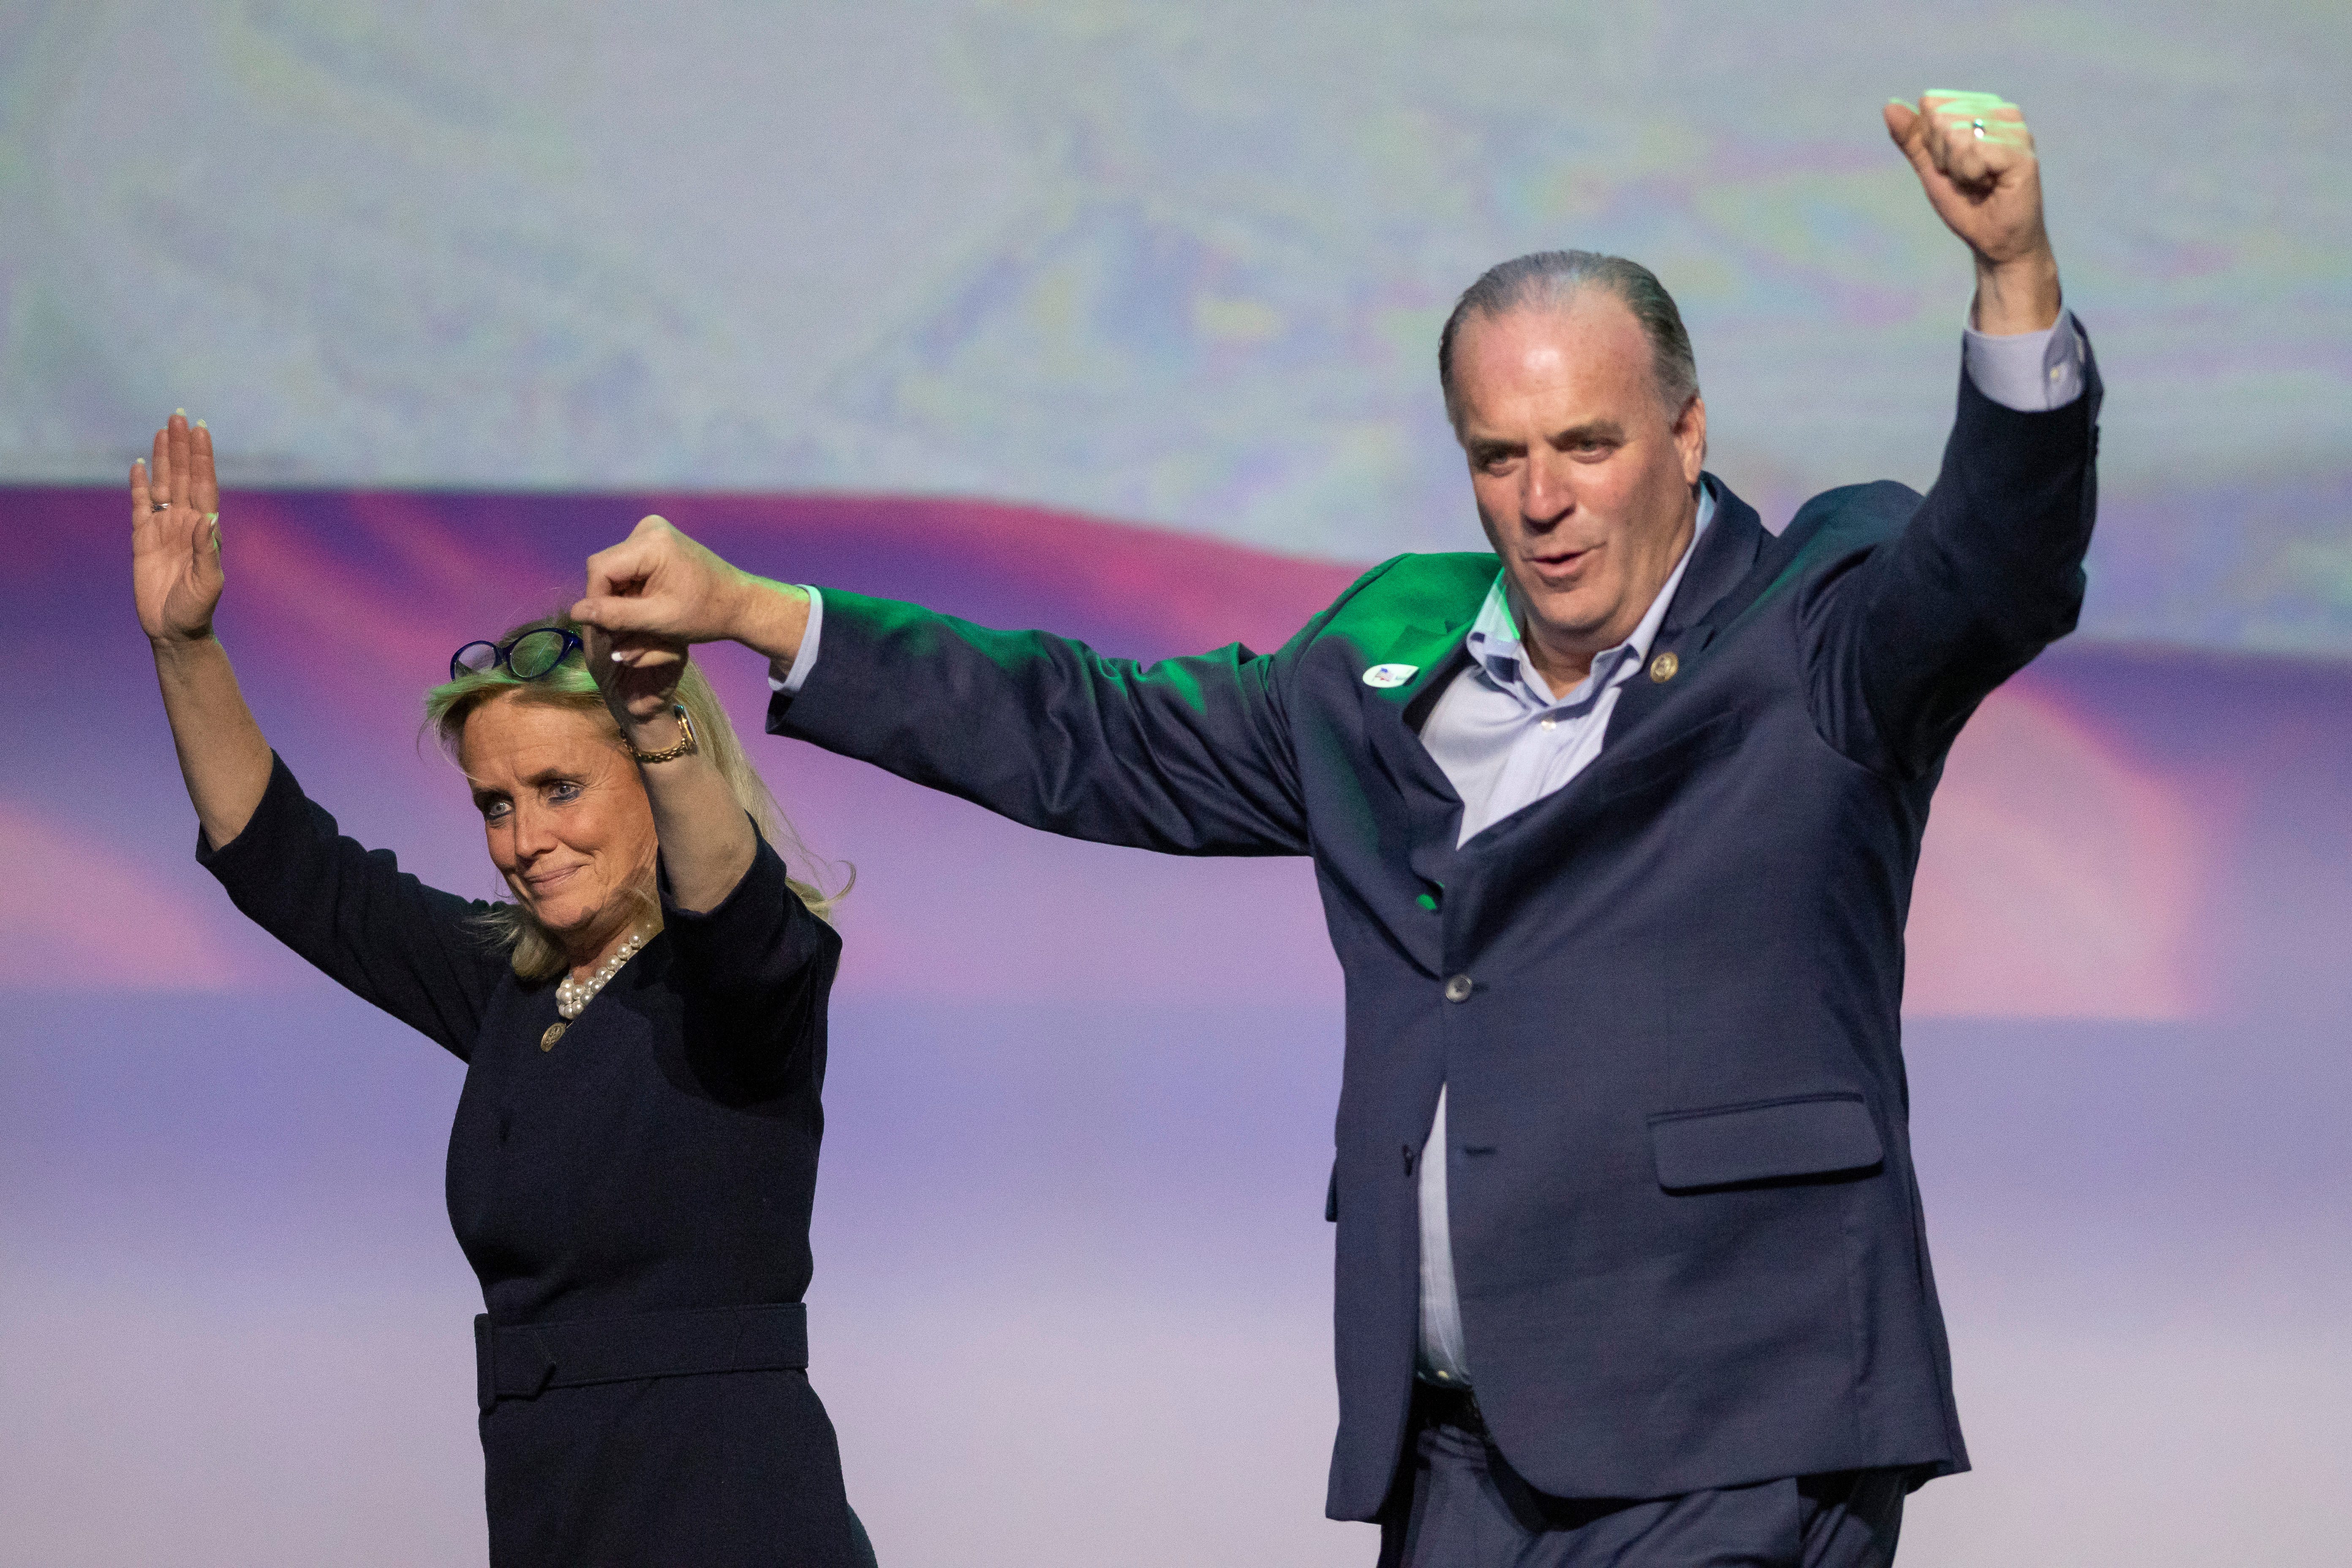 U.S. Rep. Debbie Dingell, left, and U.S. Rep. Dan Kildee join hands after speaking  at the Michigan Democratic Party  election night event at the Sound Board Theater at Motor City Casino in Detroit, November 6, 2018.